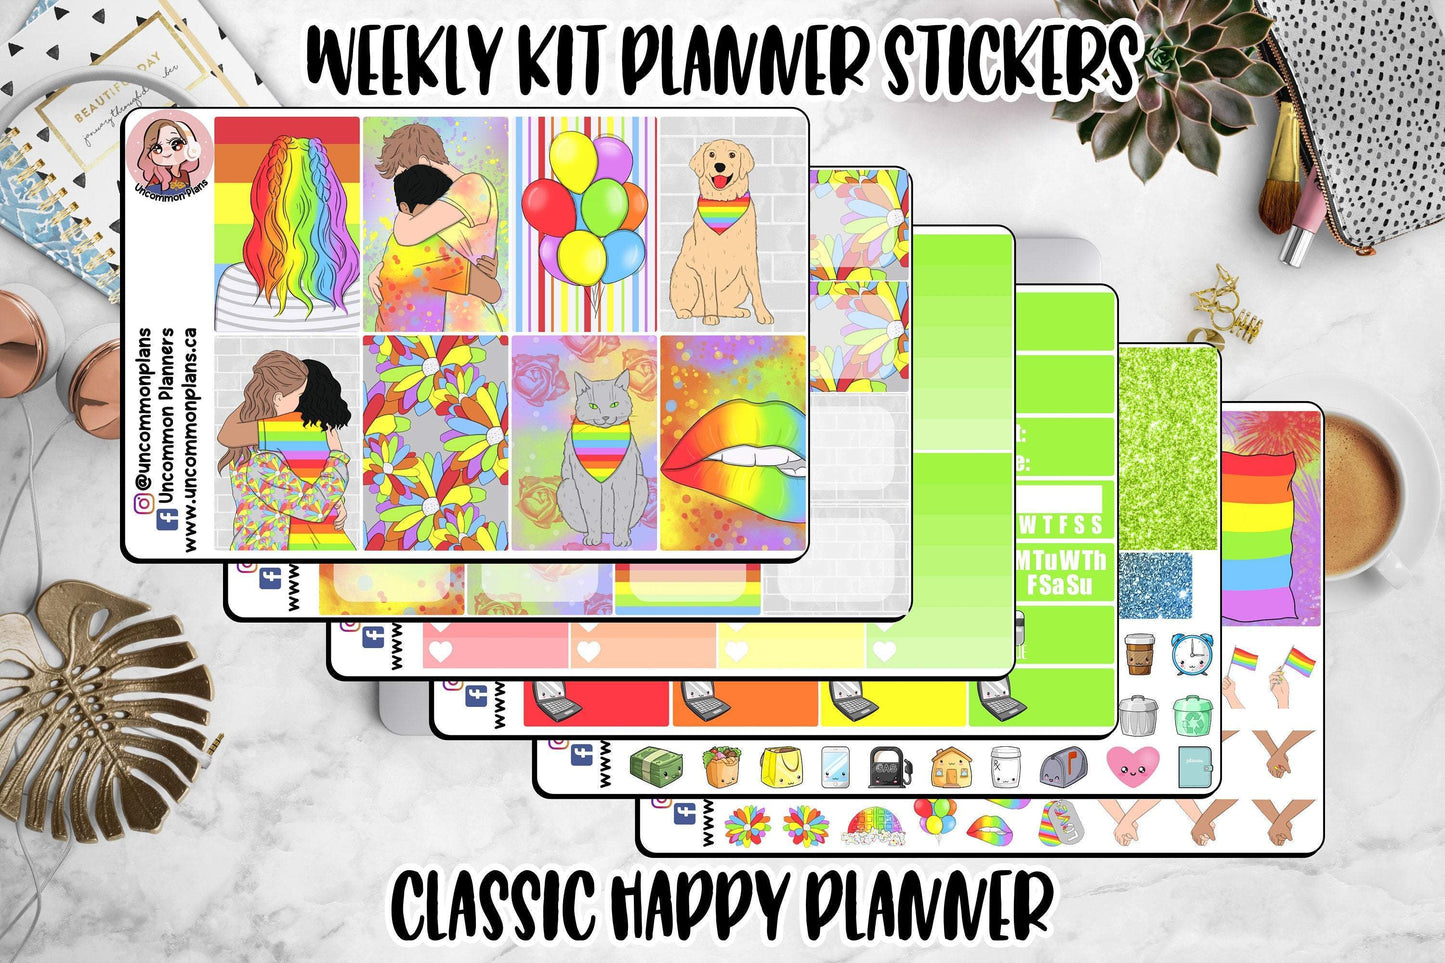 LGBTQ+ Pride Parade Weekly Kit Happy Planner Stickers